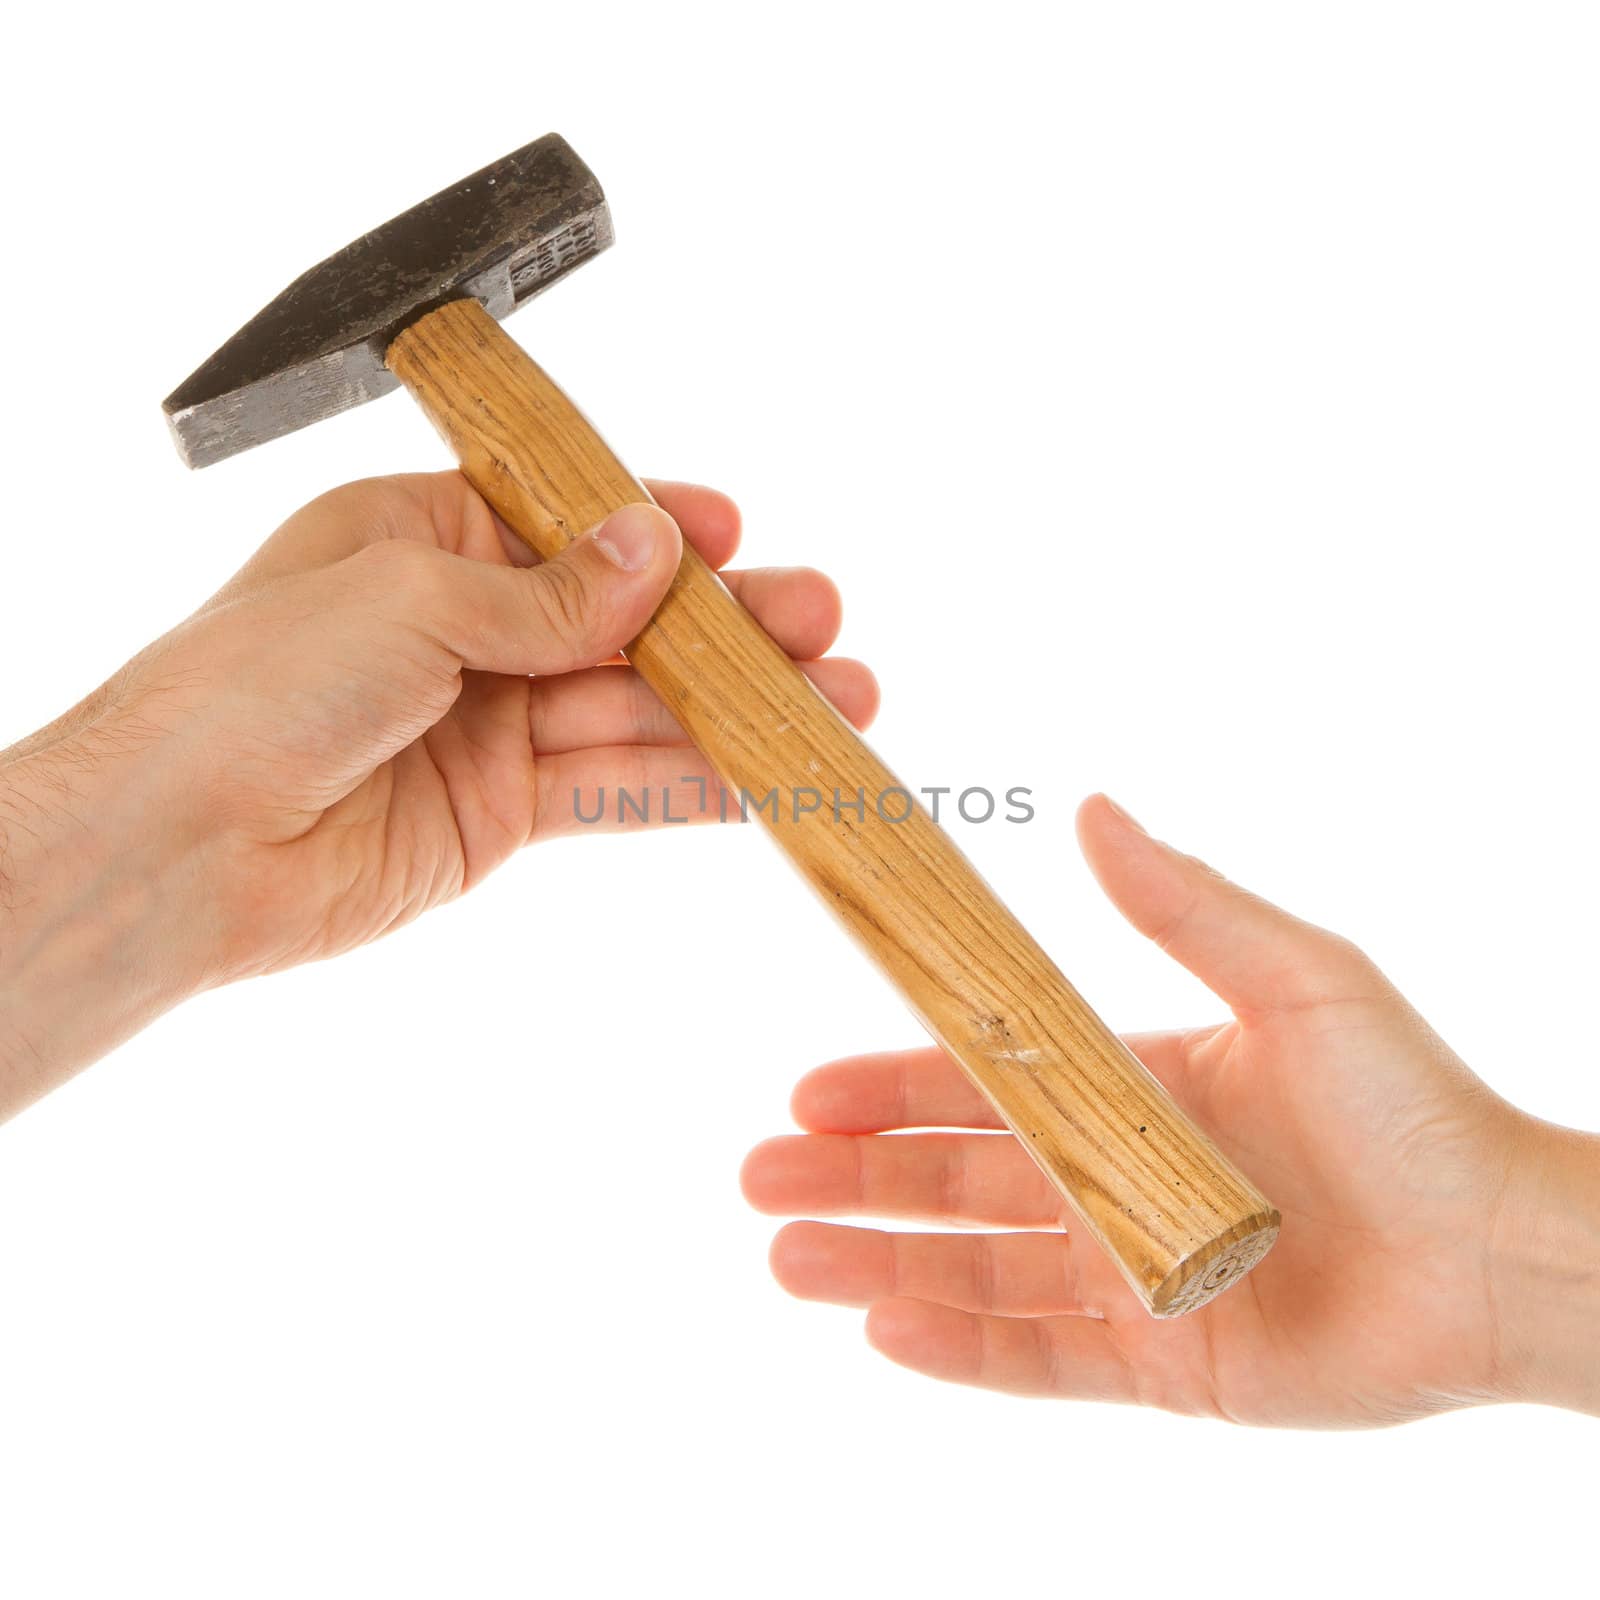 Man giving a woman an used hammer